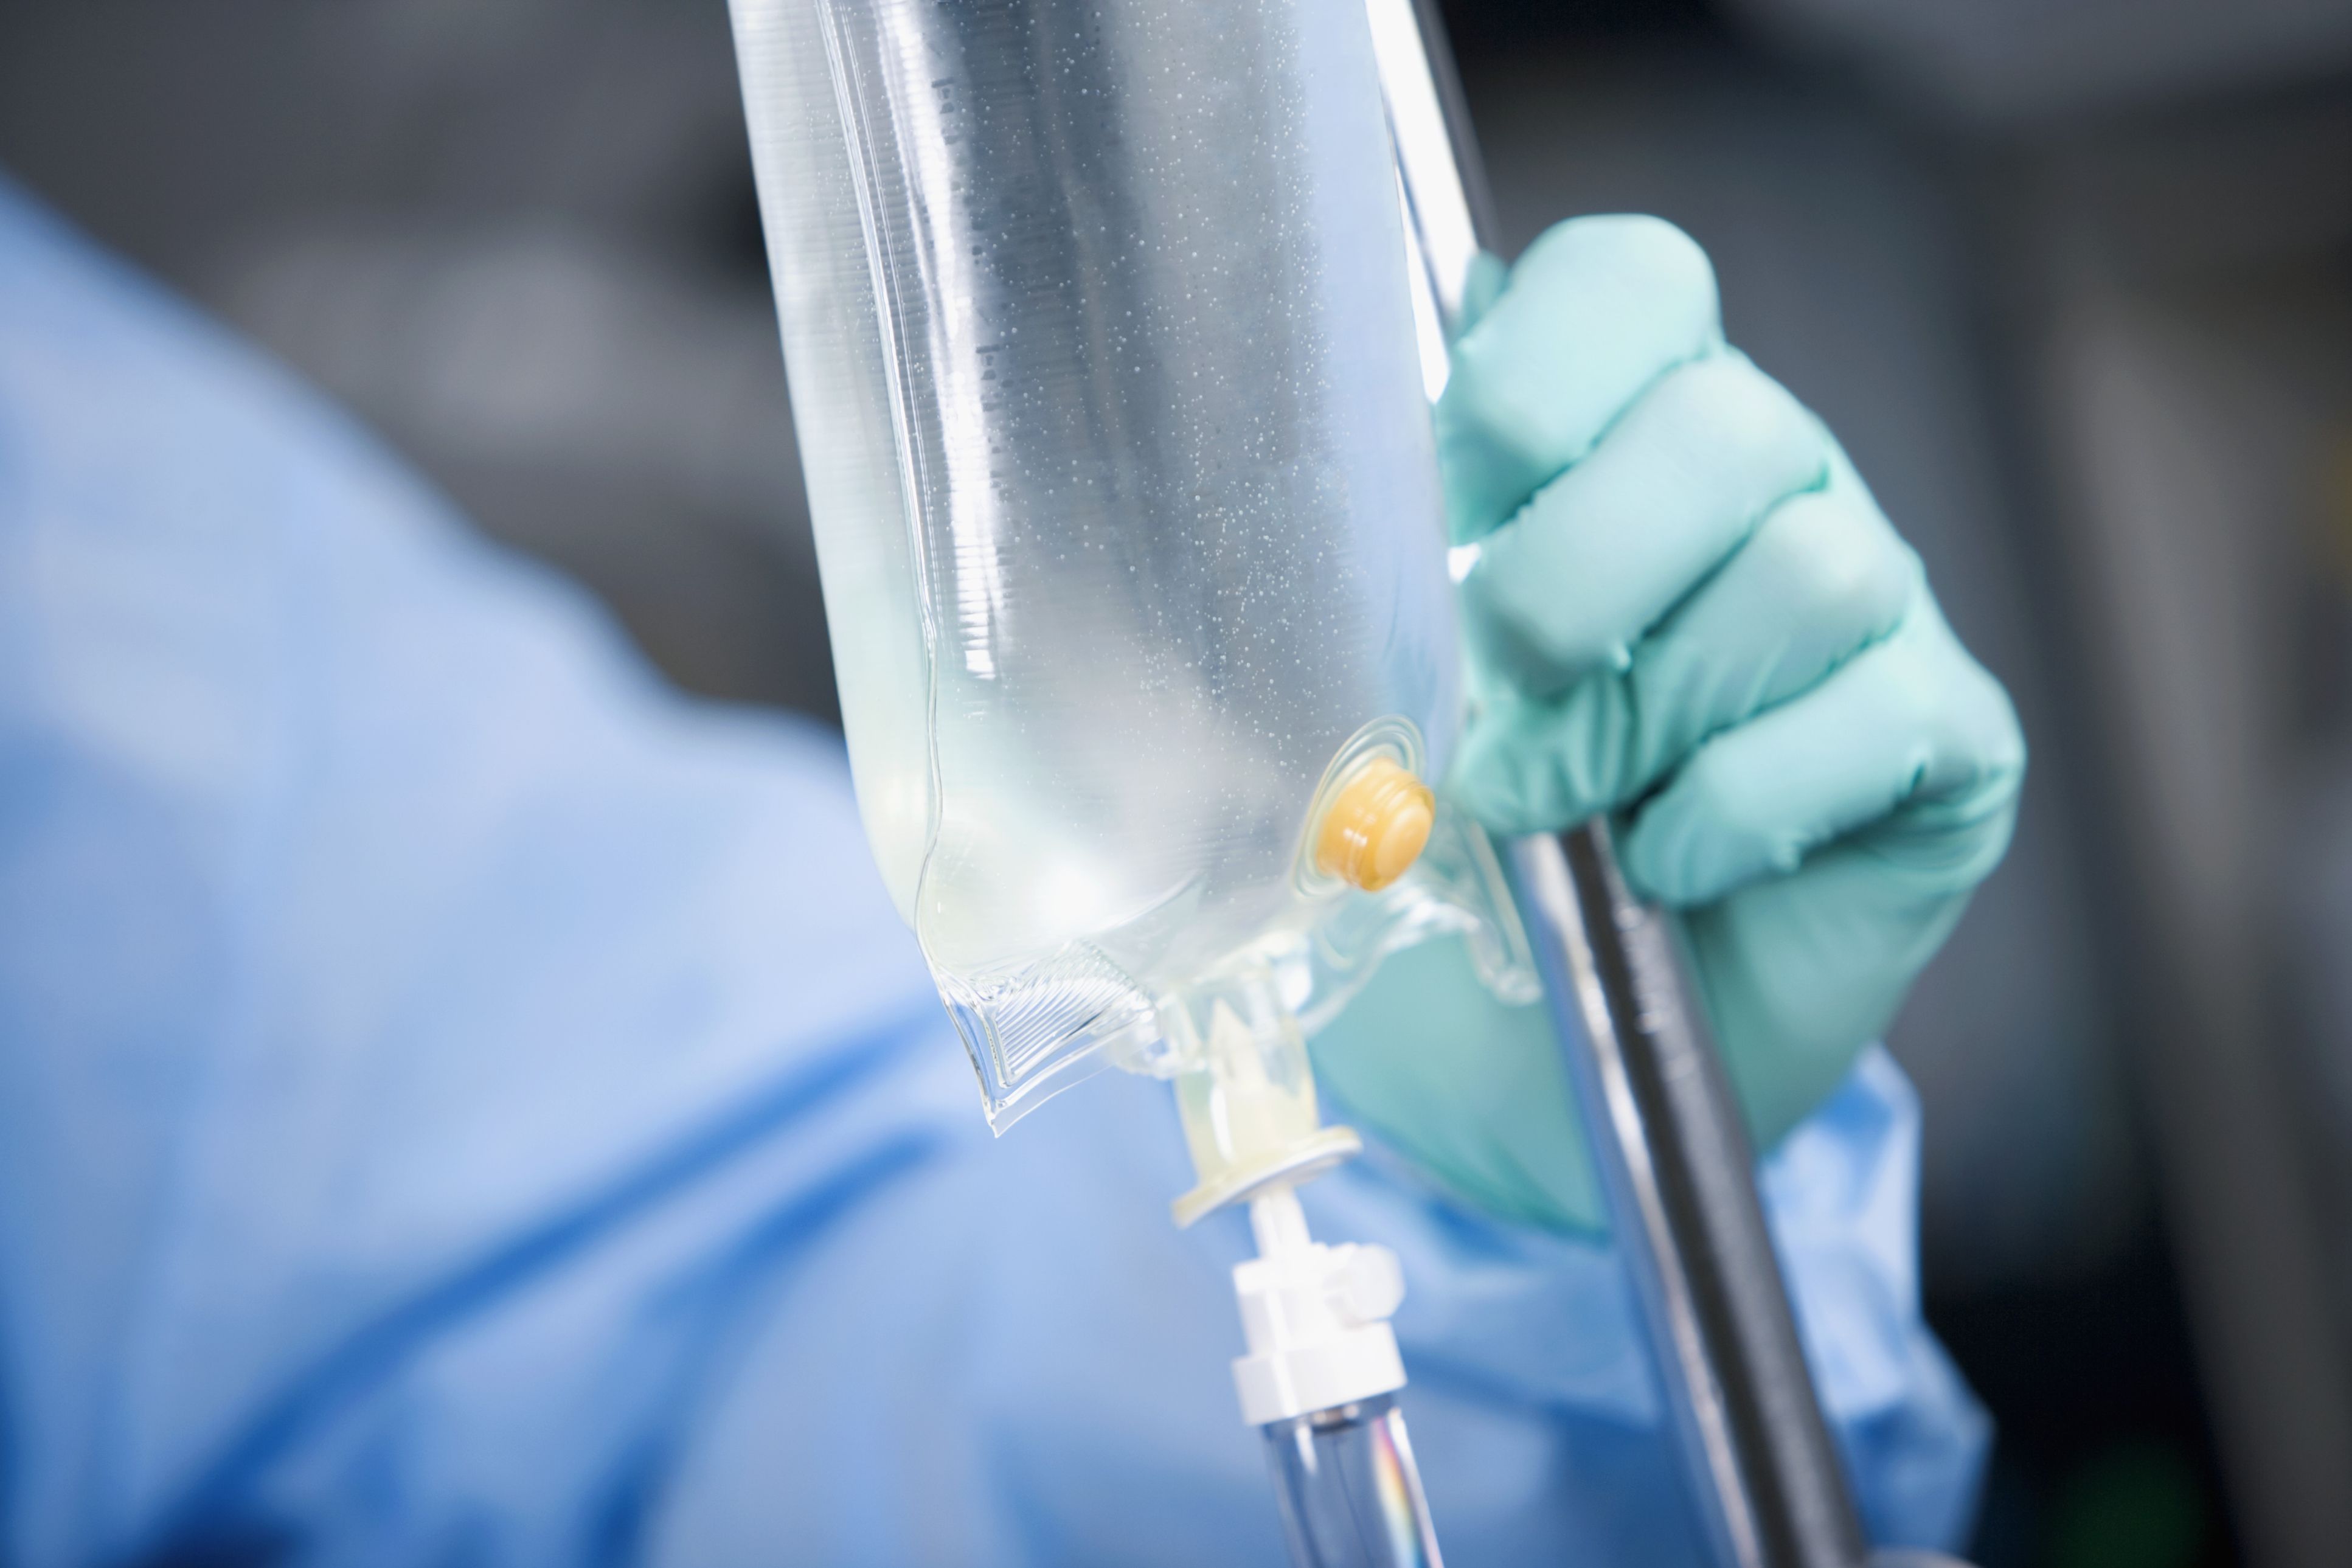 IV bag shortage leads hospitals to use alternative ways to deliver drugs